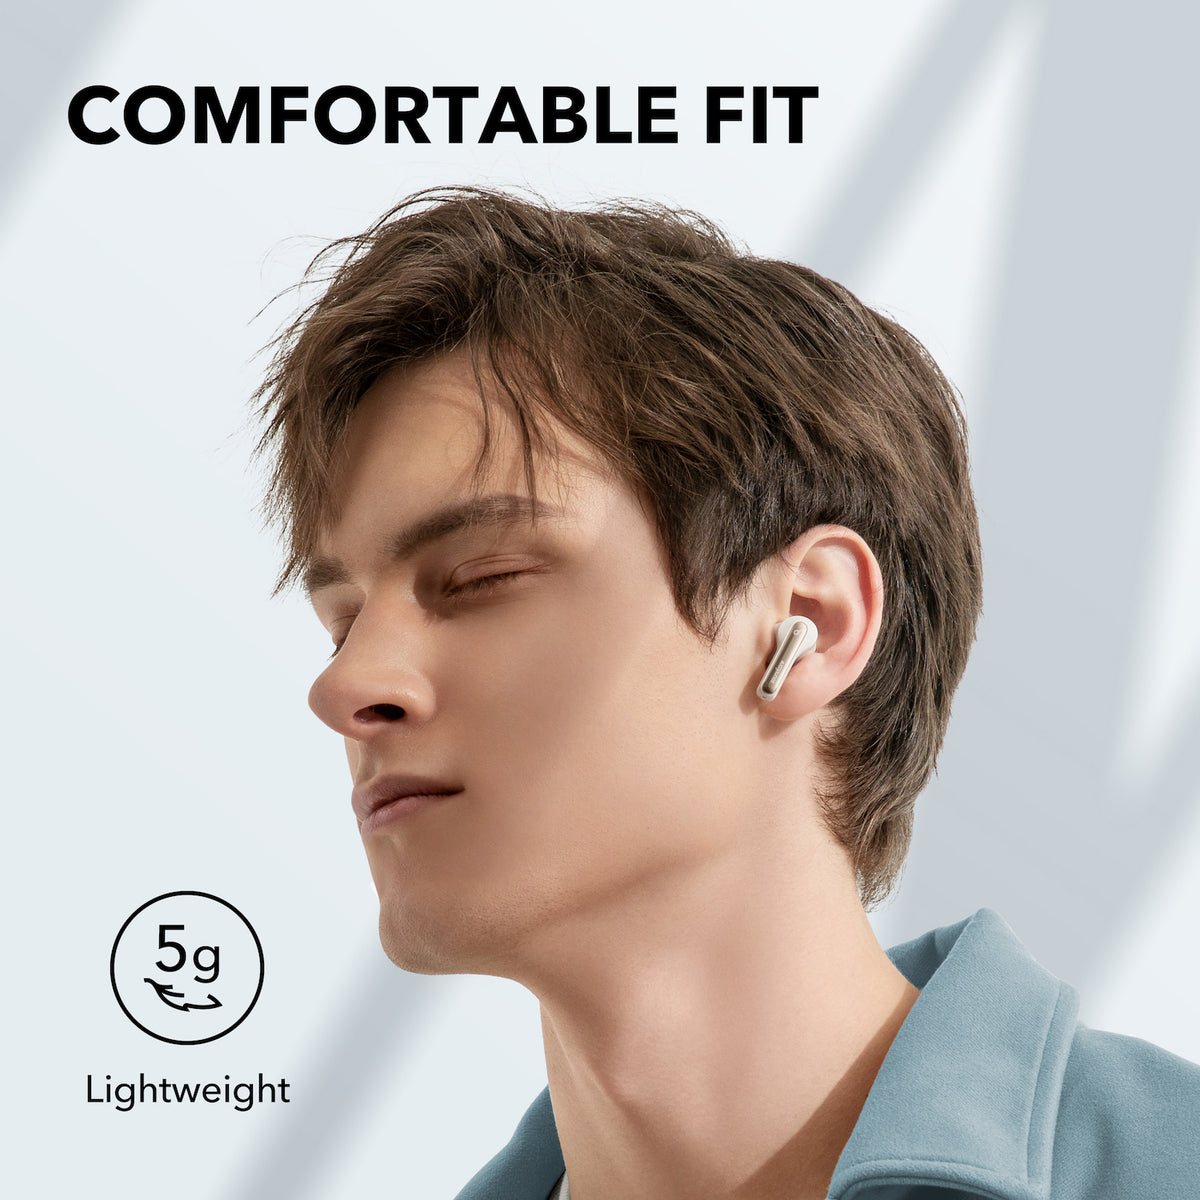 Life P3i | Hybrid Active Noise Cancelling Earbuds